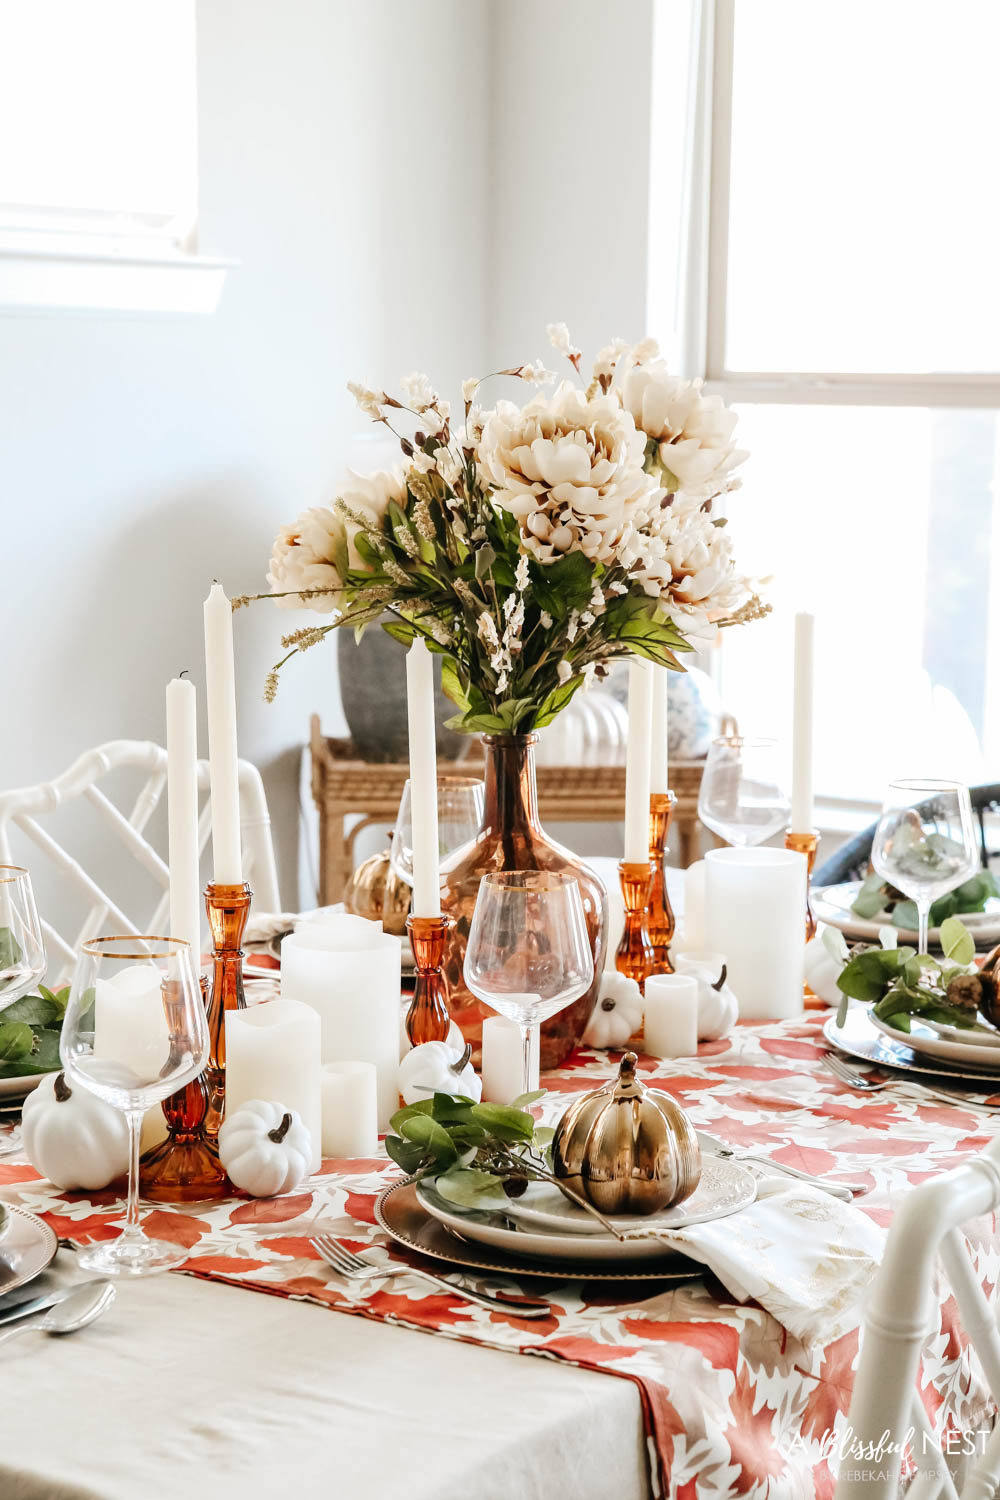 A fall table set with shades of oranges and taupe linens